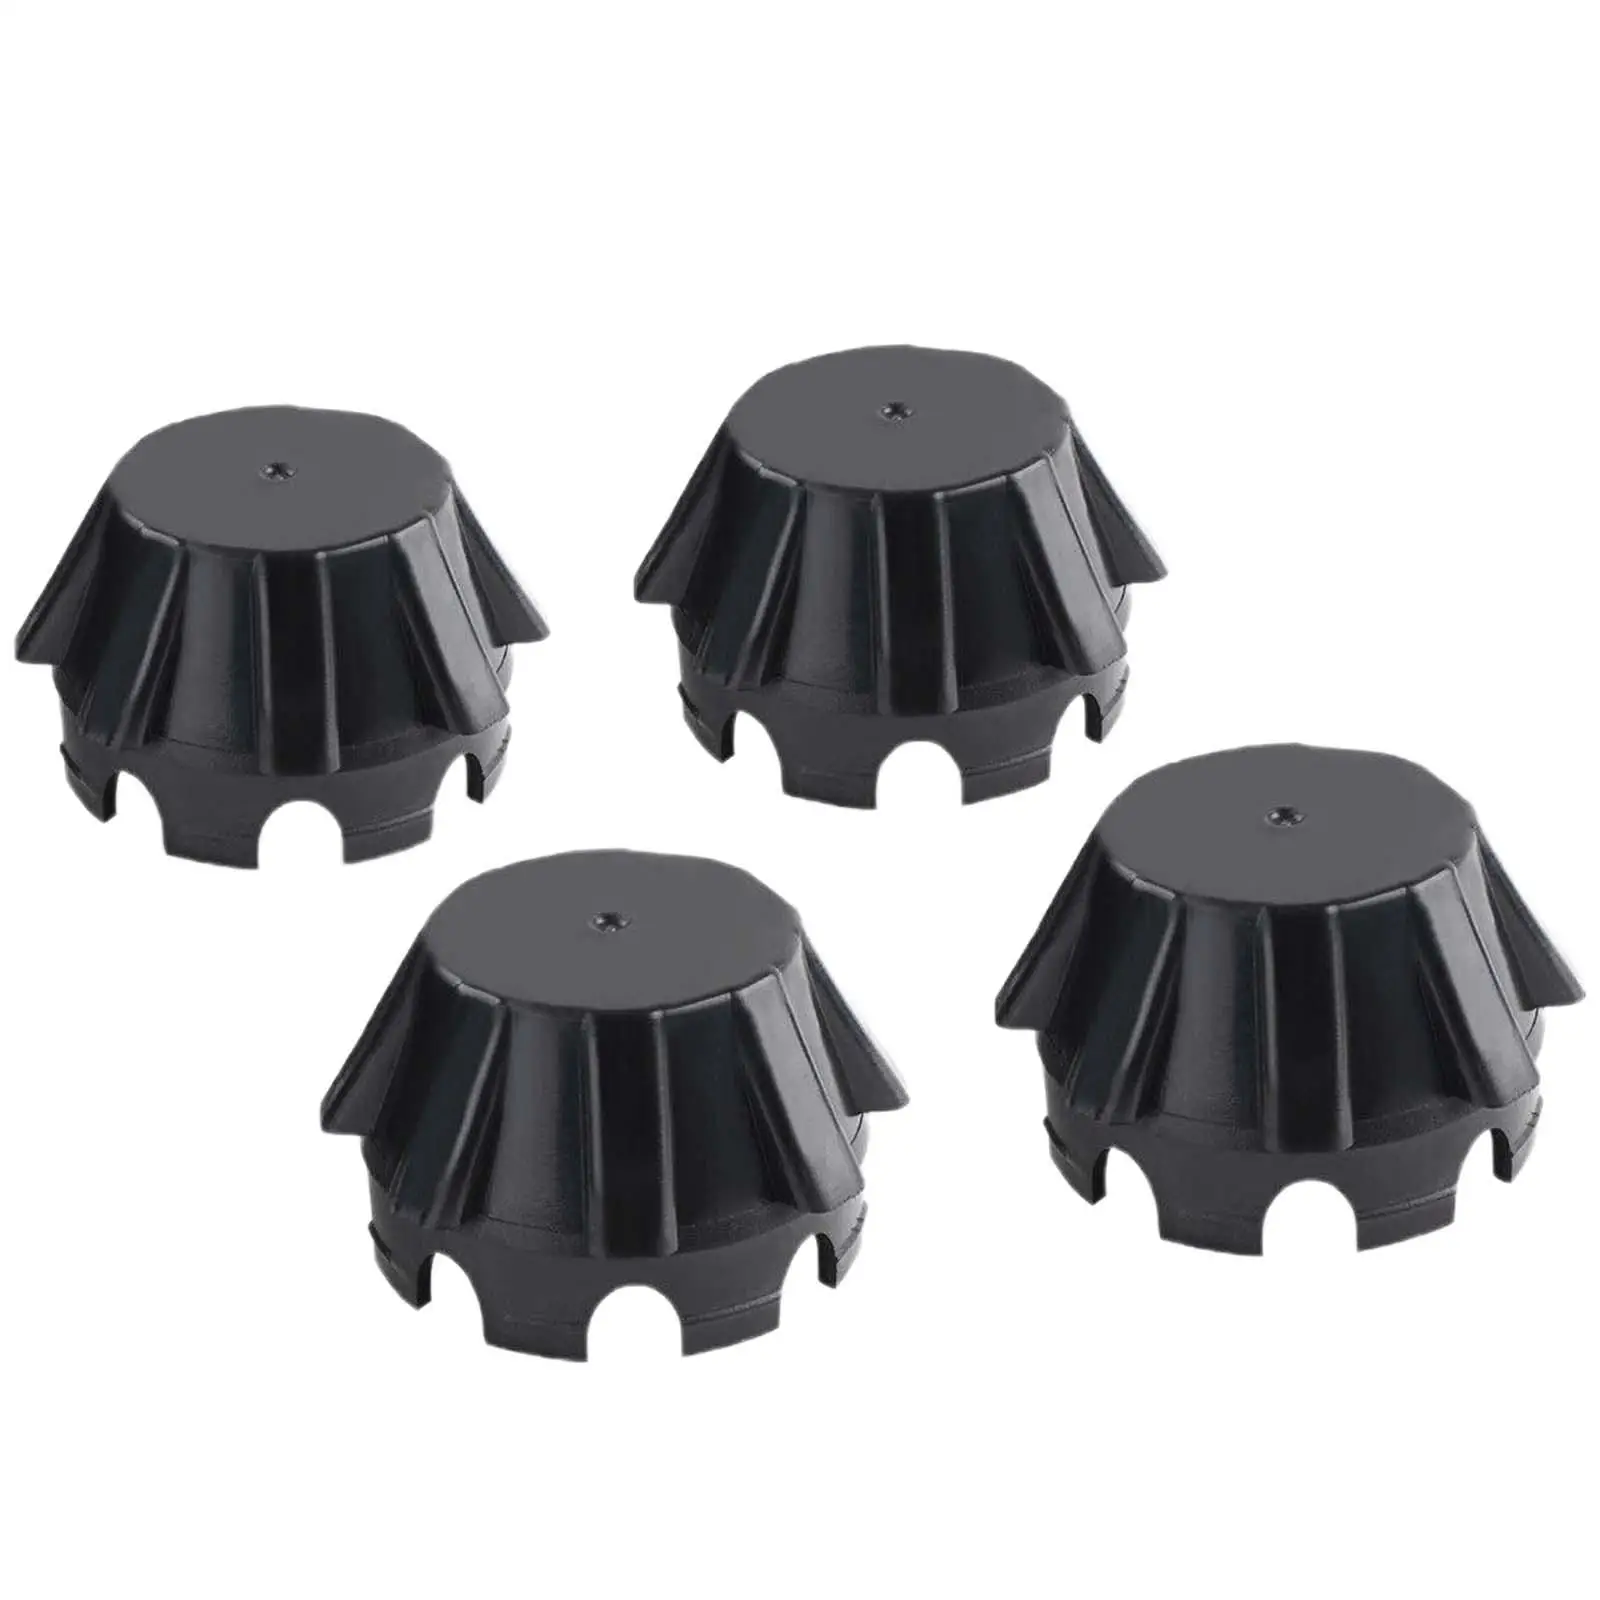 4Pcs Wheel Center Hub Caps 11065-1341 Replaces Accessory for Kawasaki Krx 1000 Easy to Install Quality Sturdy Professional